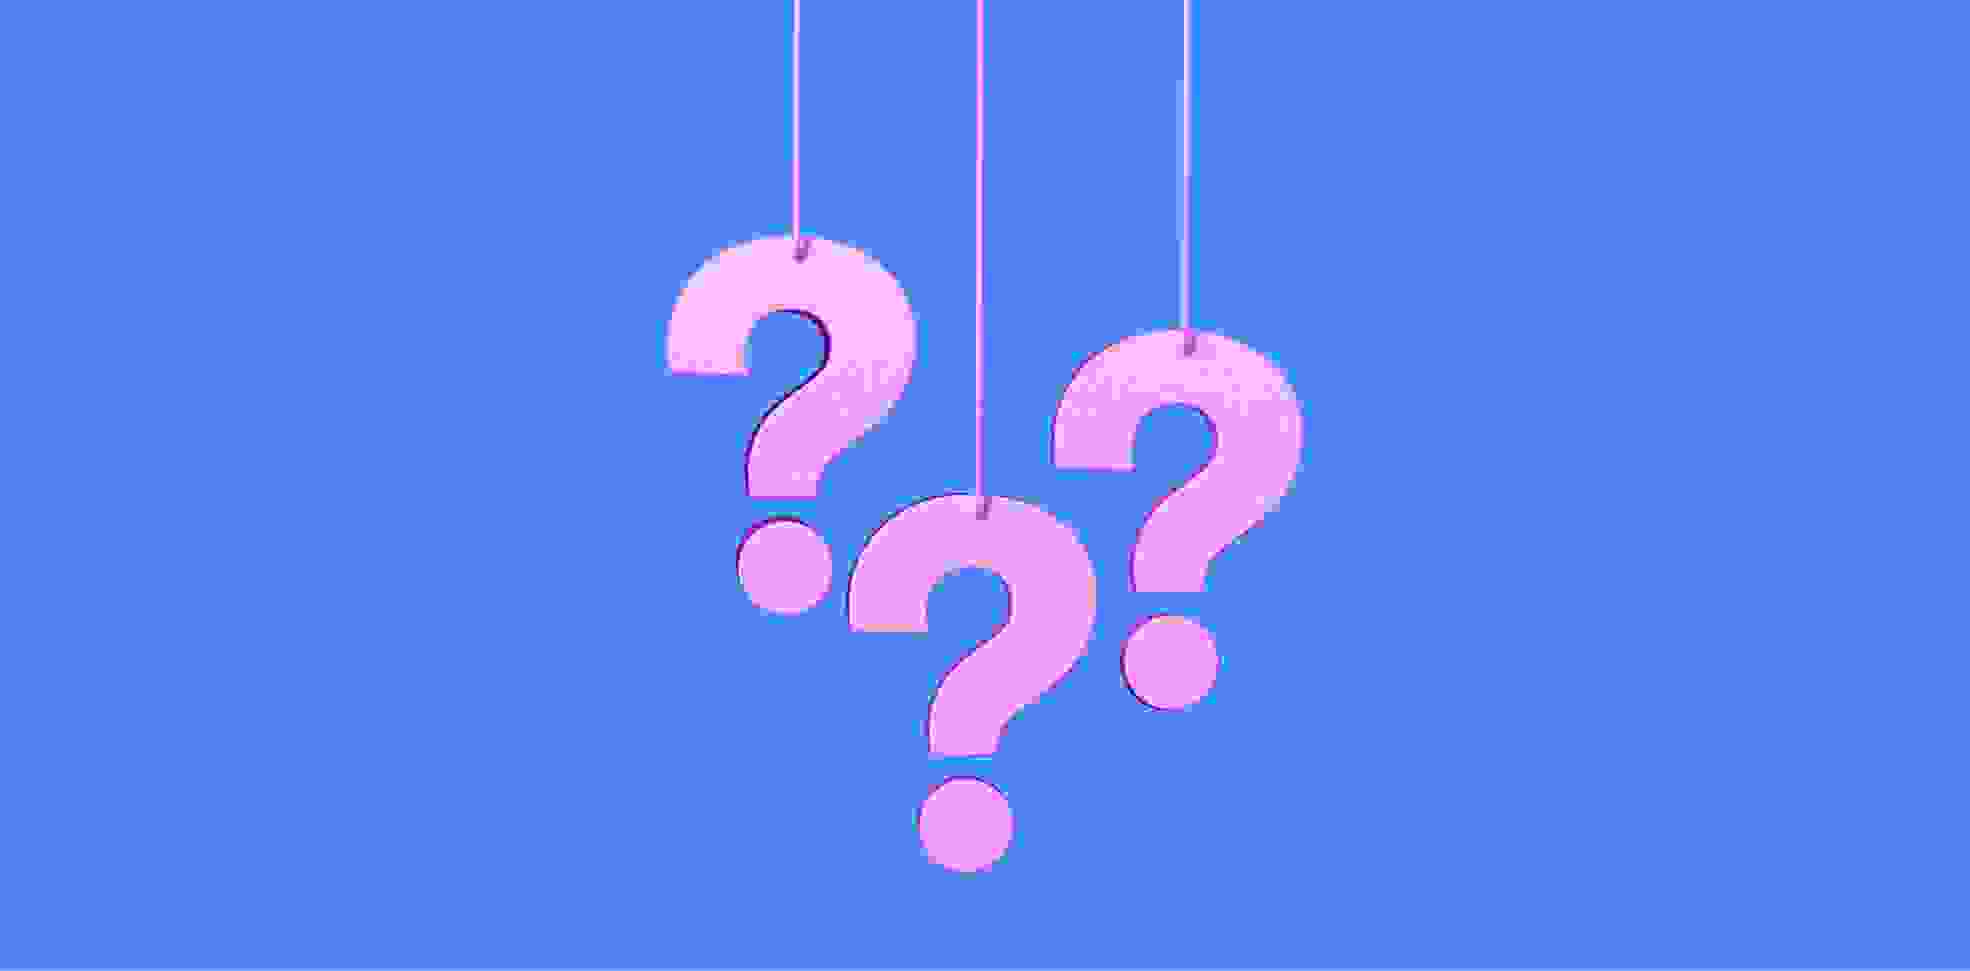 three question marks hanging on ropes